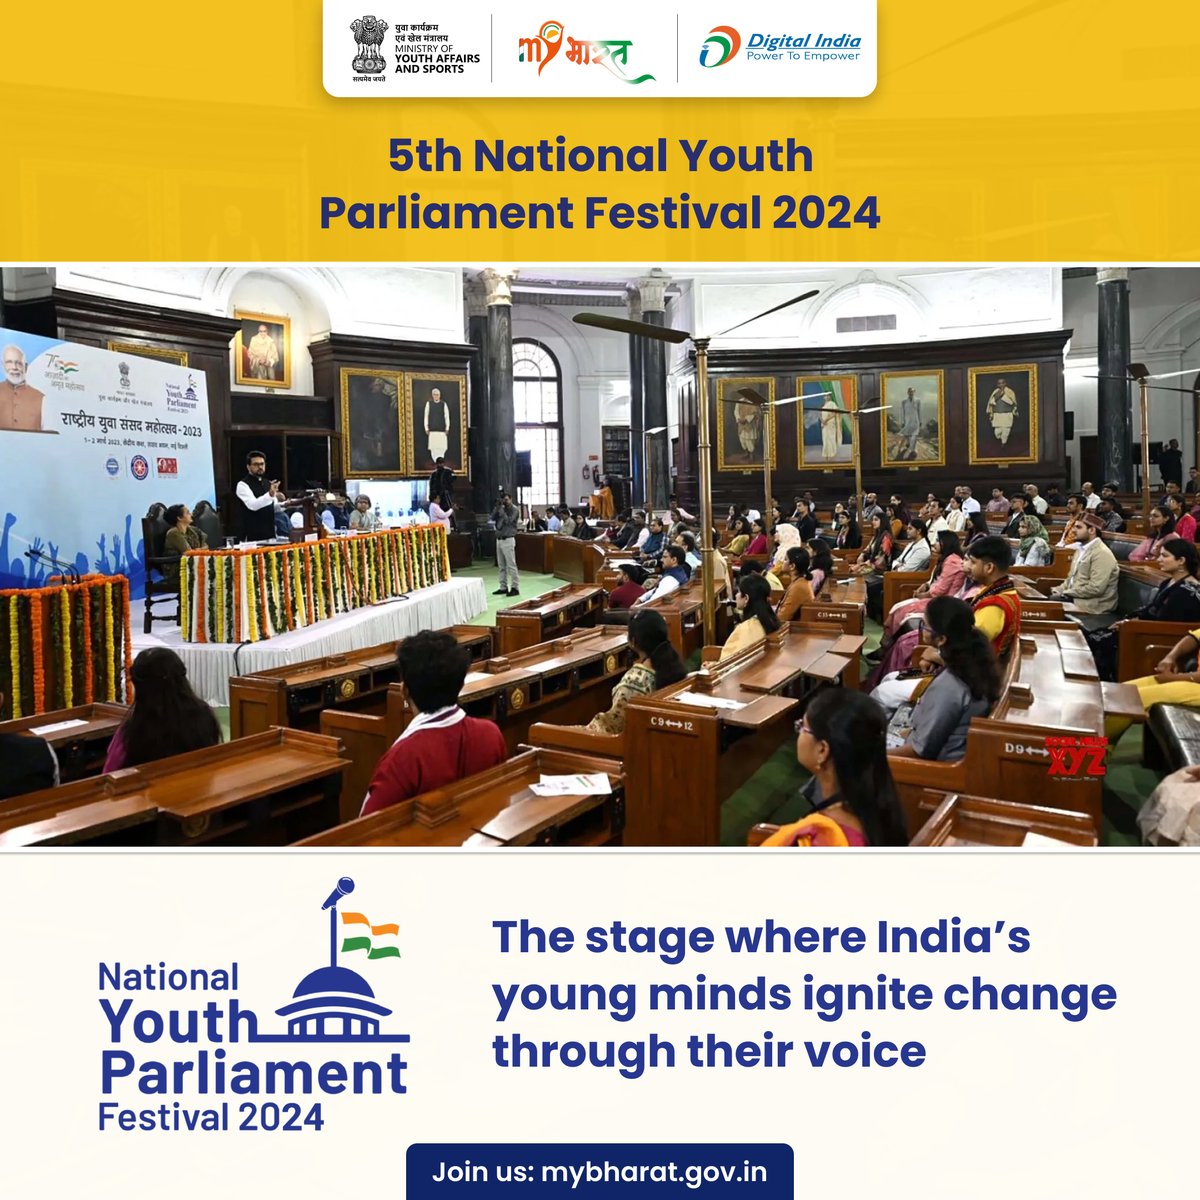 Witness the spark of the flame of change at the 5th National Youth Parliament Festival 2024 where India's brightest young minds passionately express their ideas and opinions on critical and relevant subjects of today.

#NYPF2024 #NationalYouthParliament #youth #india